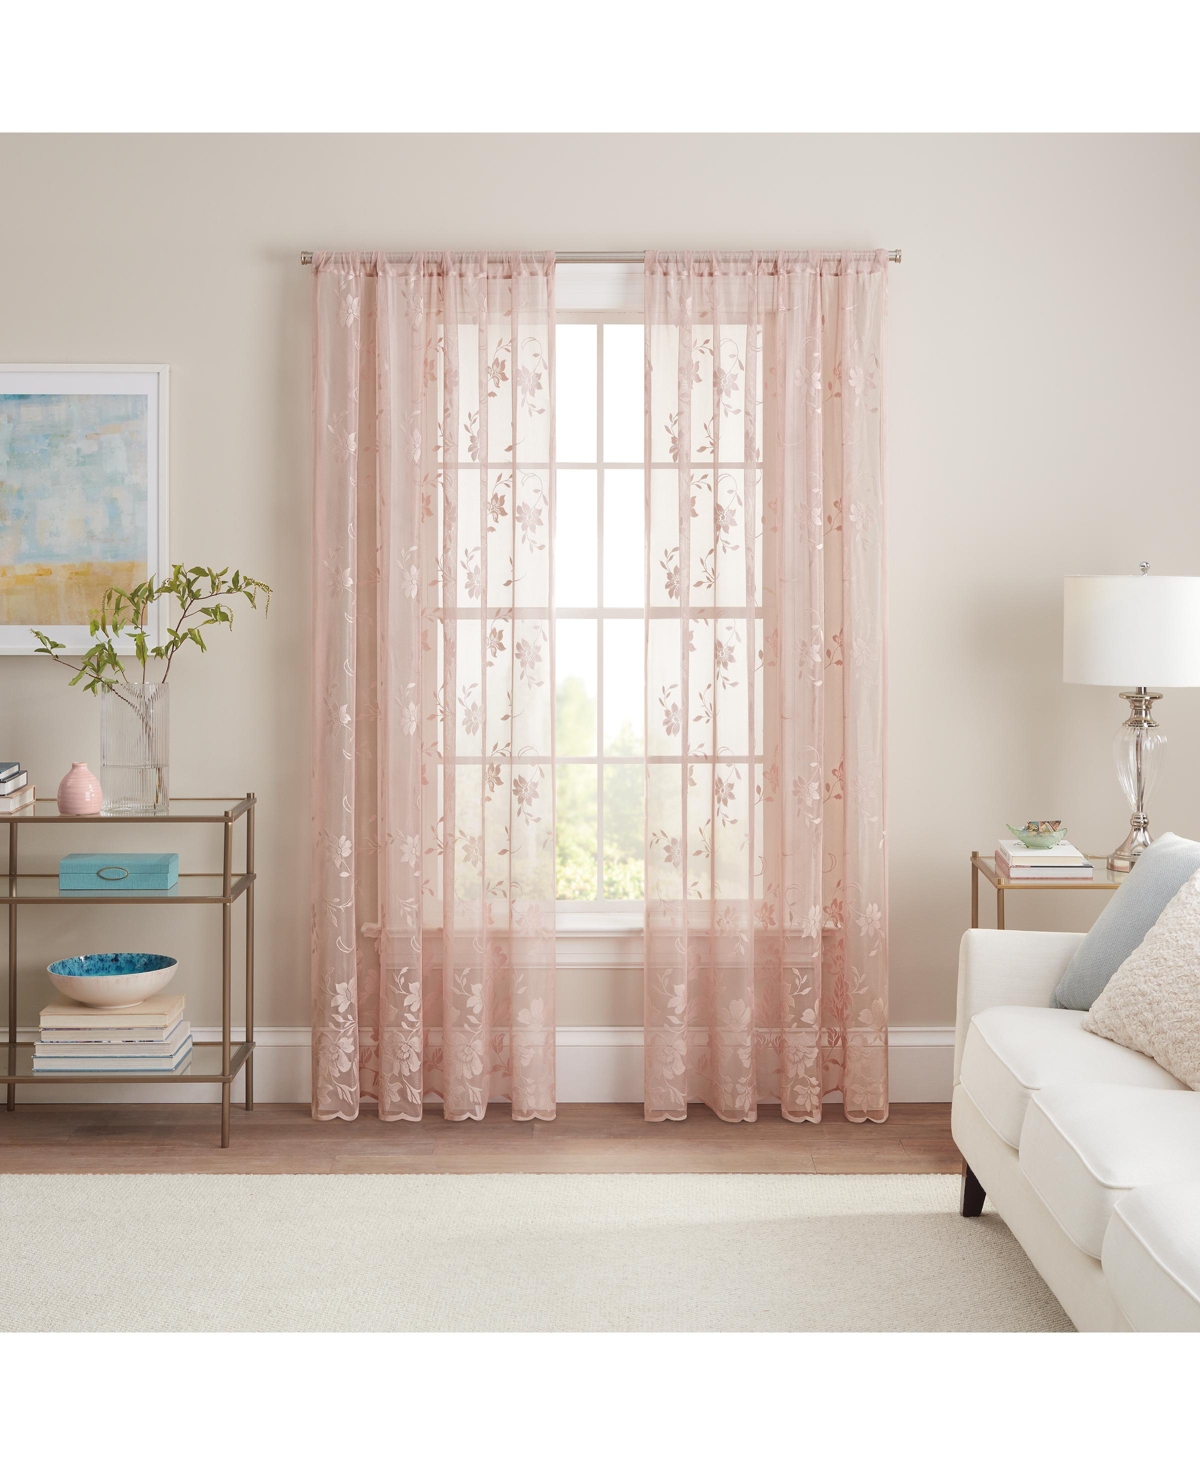 Waverly Sherry Floral Lace Sheer Rod Pocket Curtain Panel, 54" X 84" In Blush